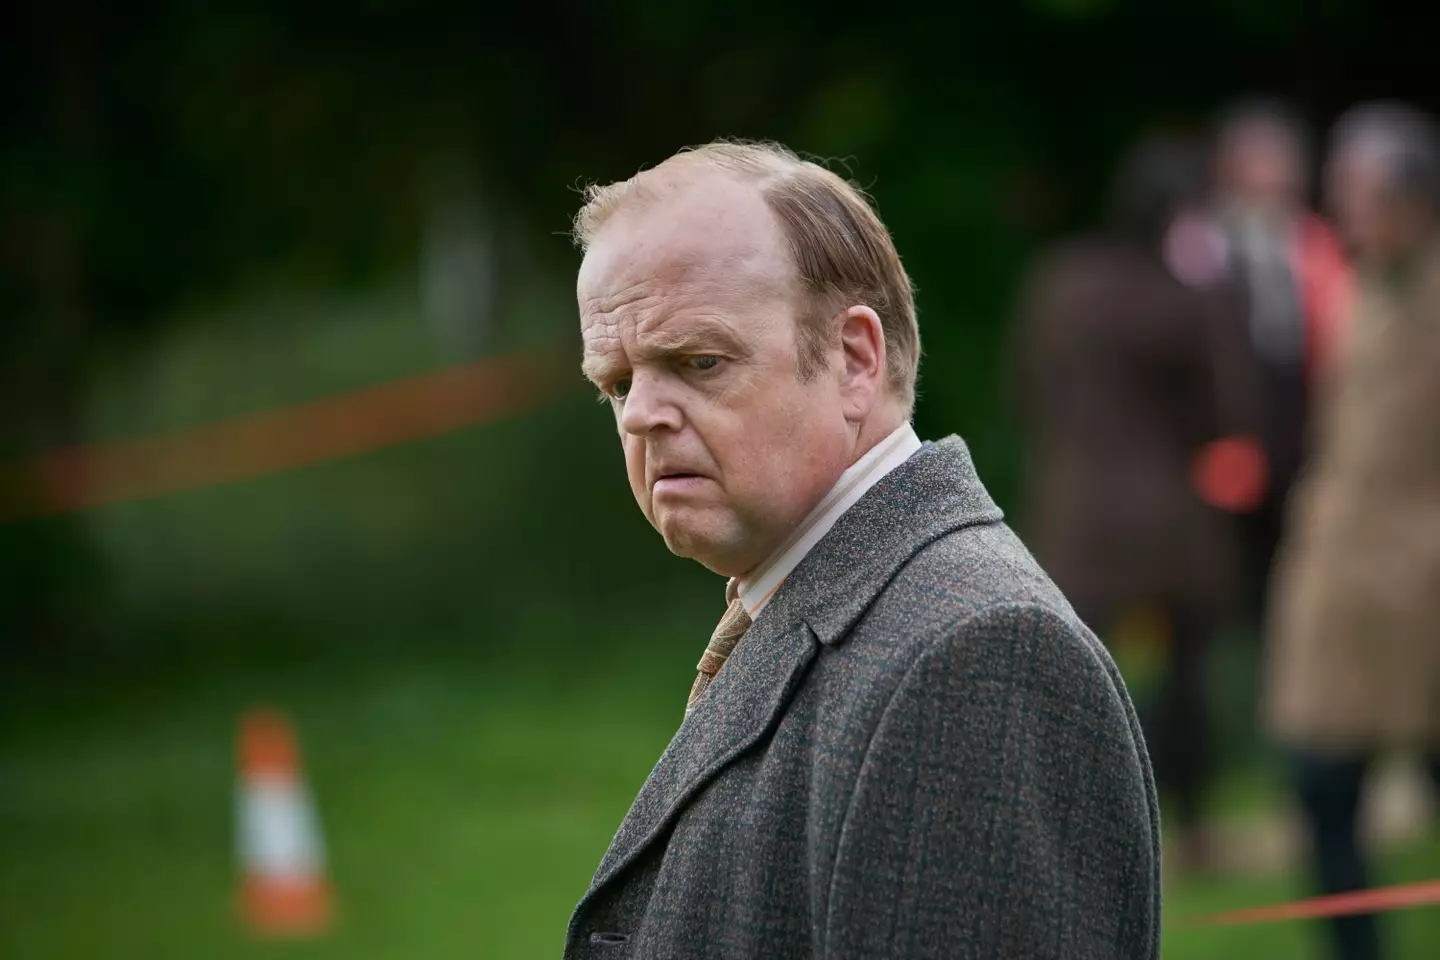 Toby Jones plays DCS Dennis Hoban, the man tasked with finding the Yorkshire Ripper.